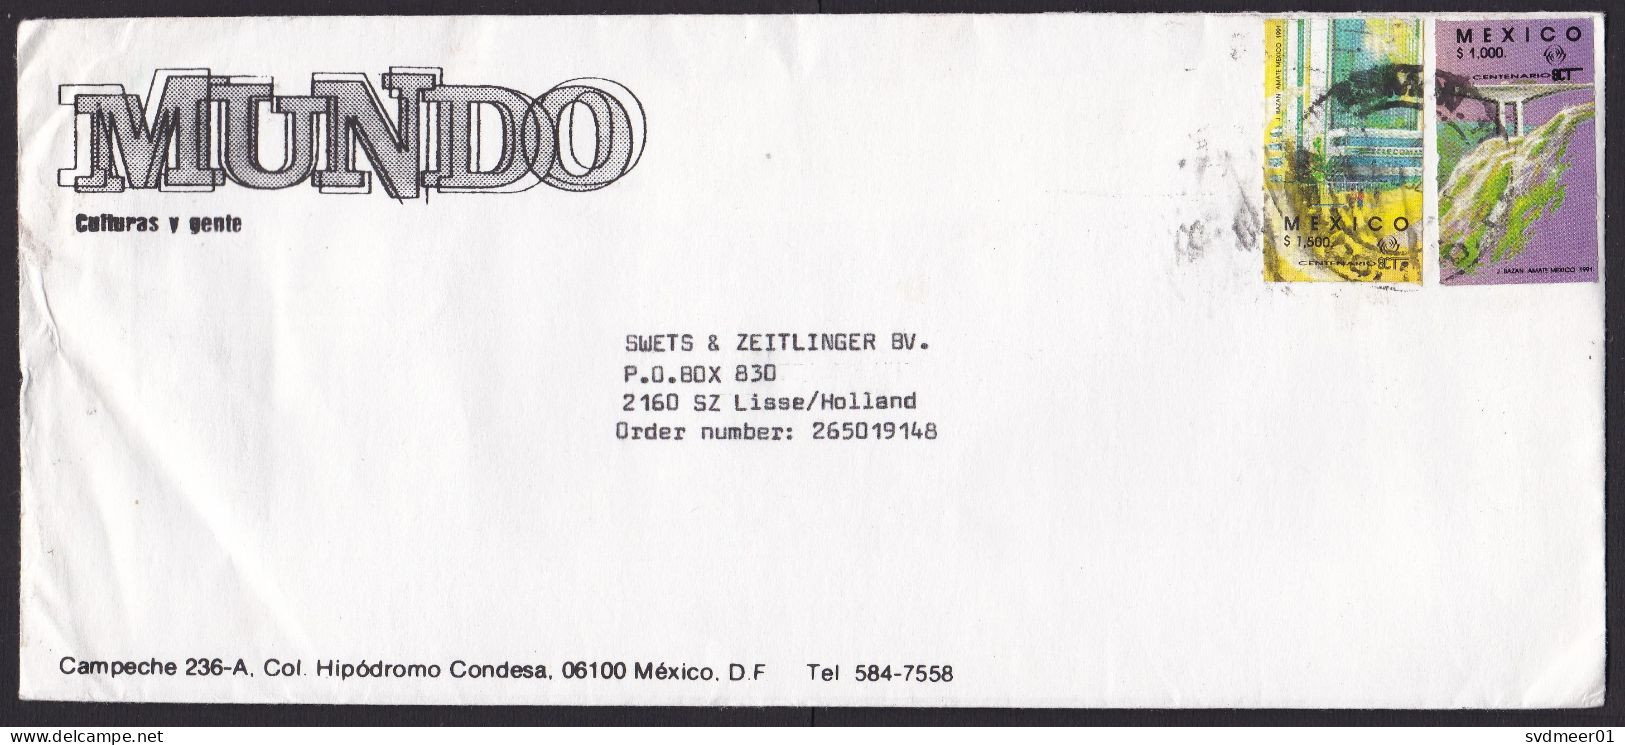 Mexico: 3x Cover To Netherlands, 1990s, 2 Stamps Each, Transport, Bus, Bridge, Satellite (minor Damage) - Mexico